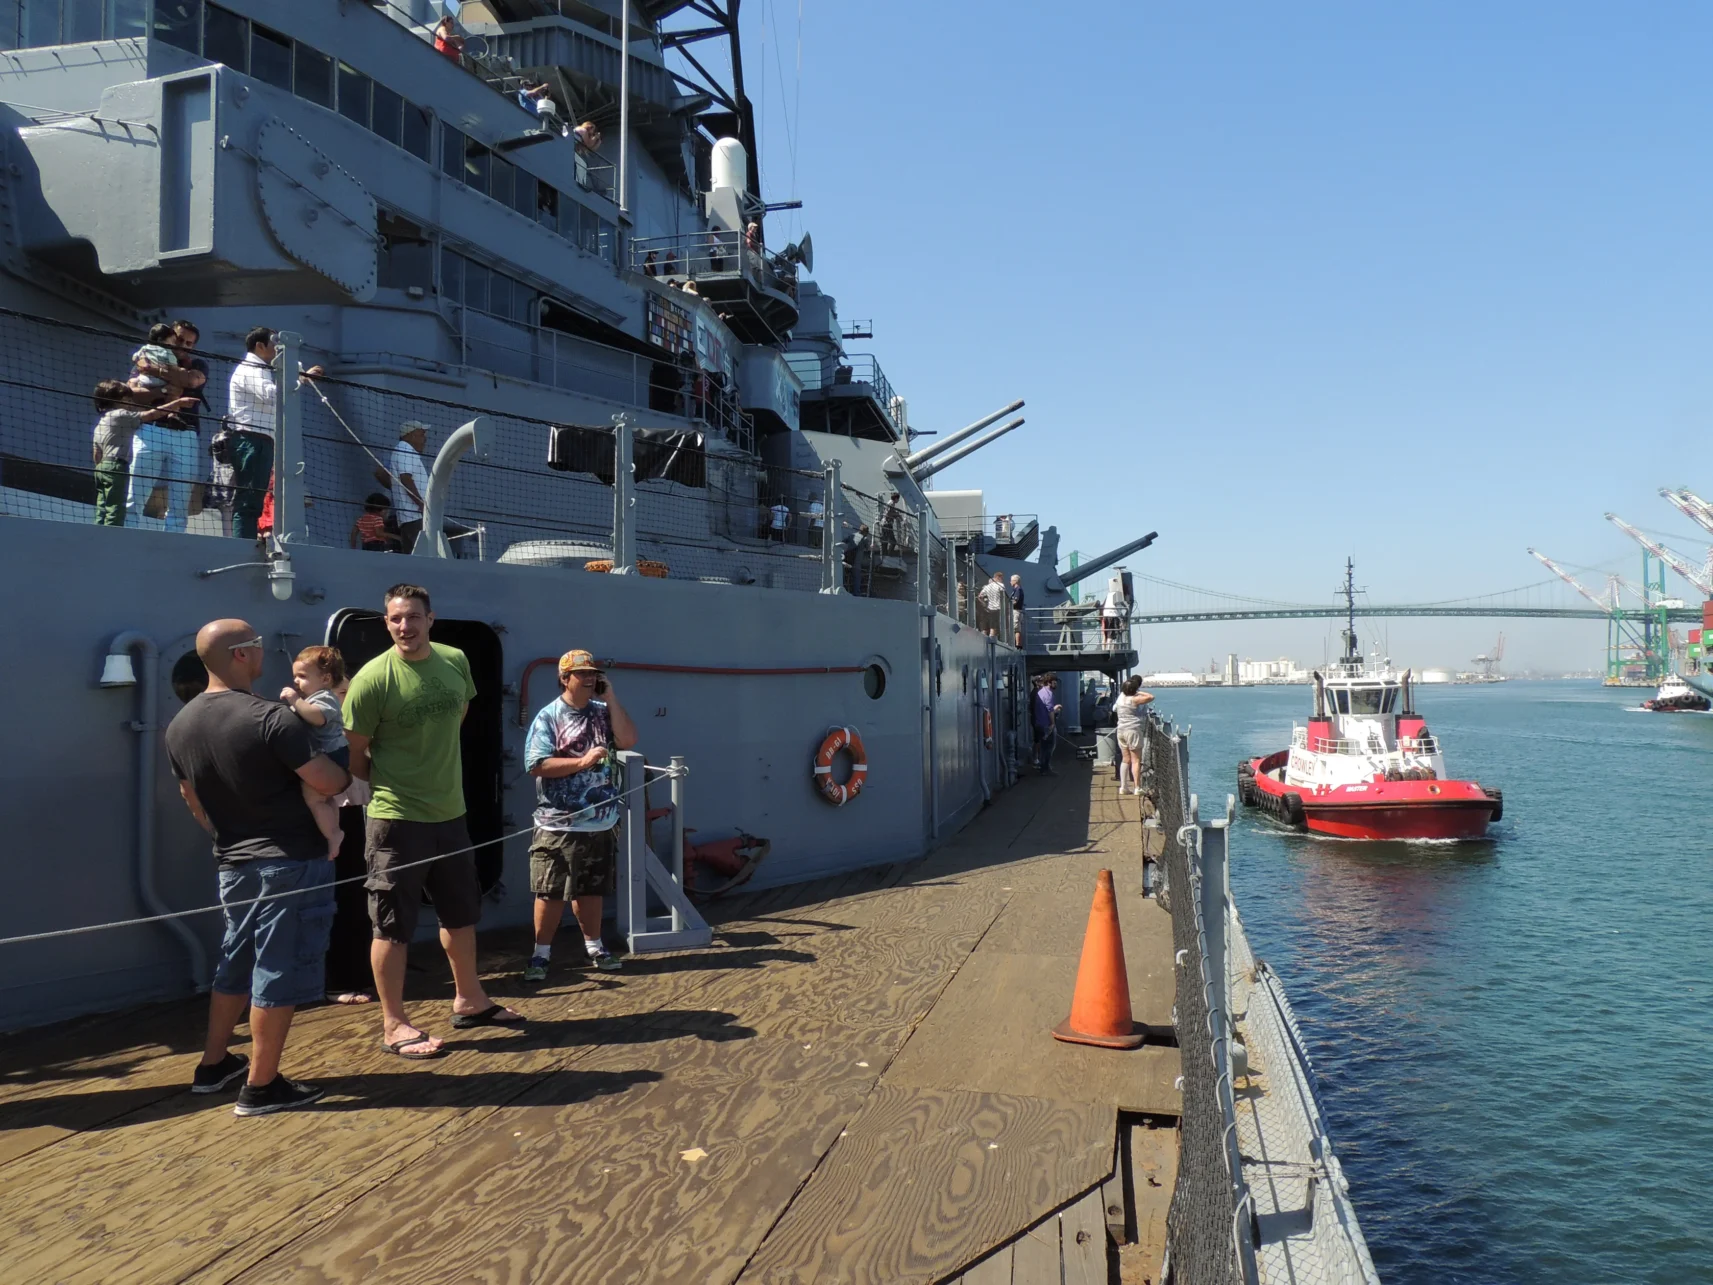 General access to the Battleship USS Iowa in Los Angeles, USA.